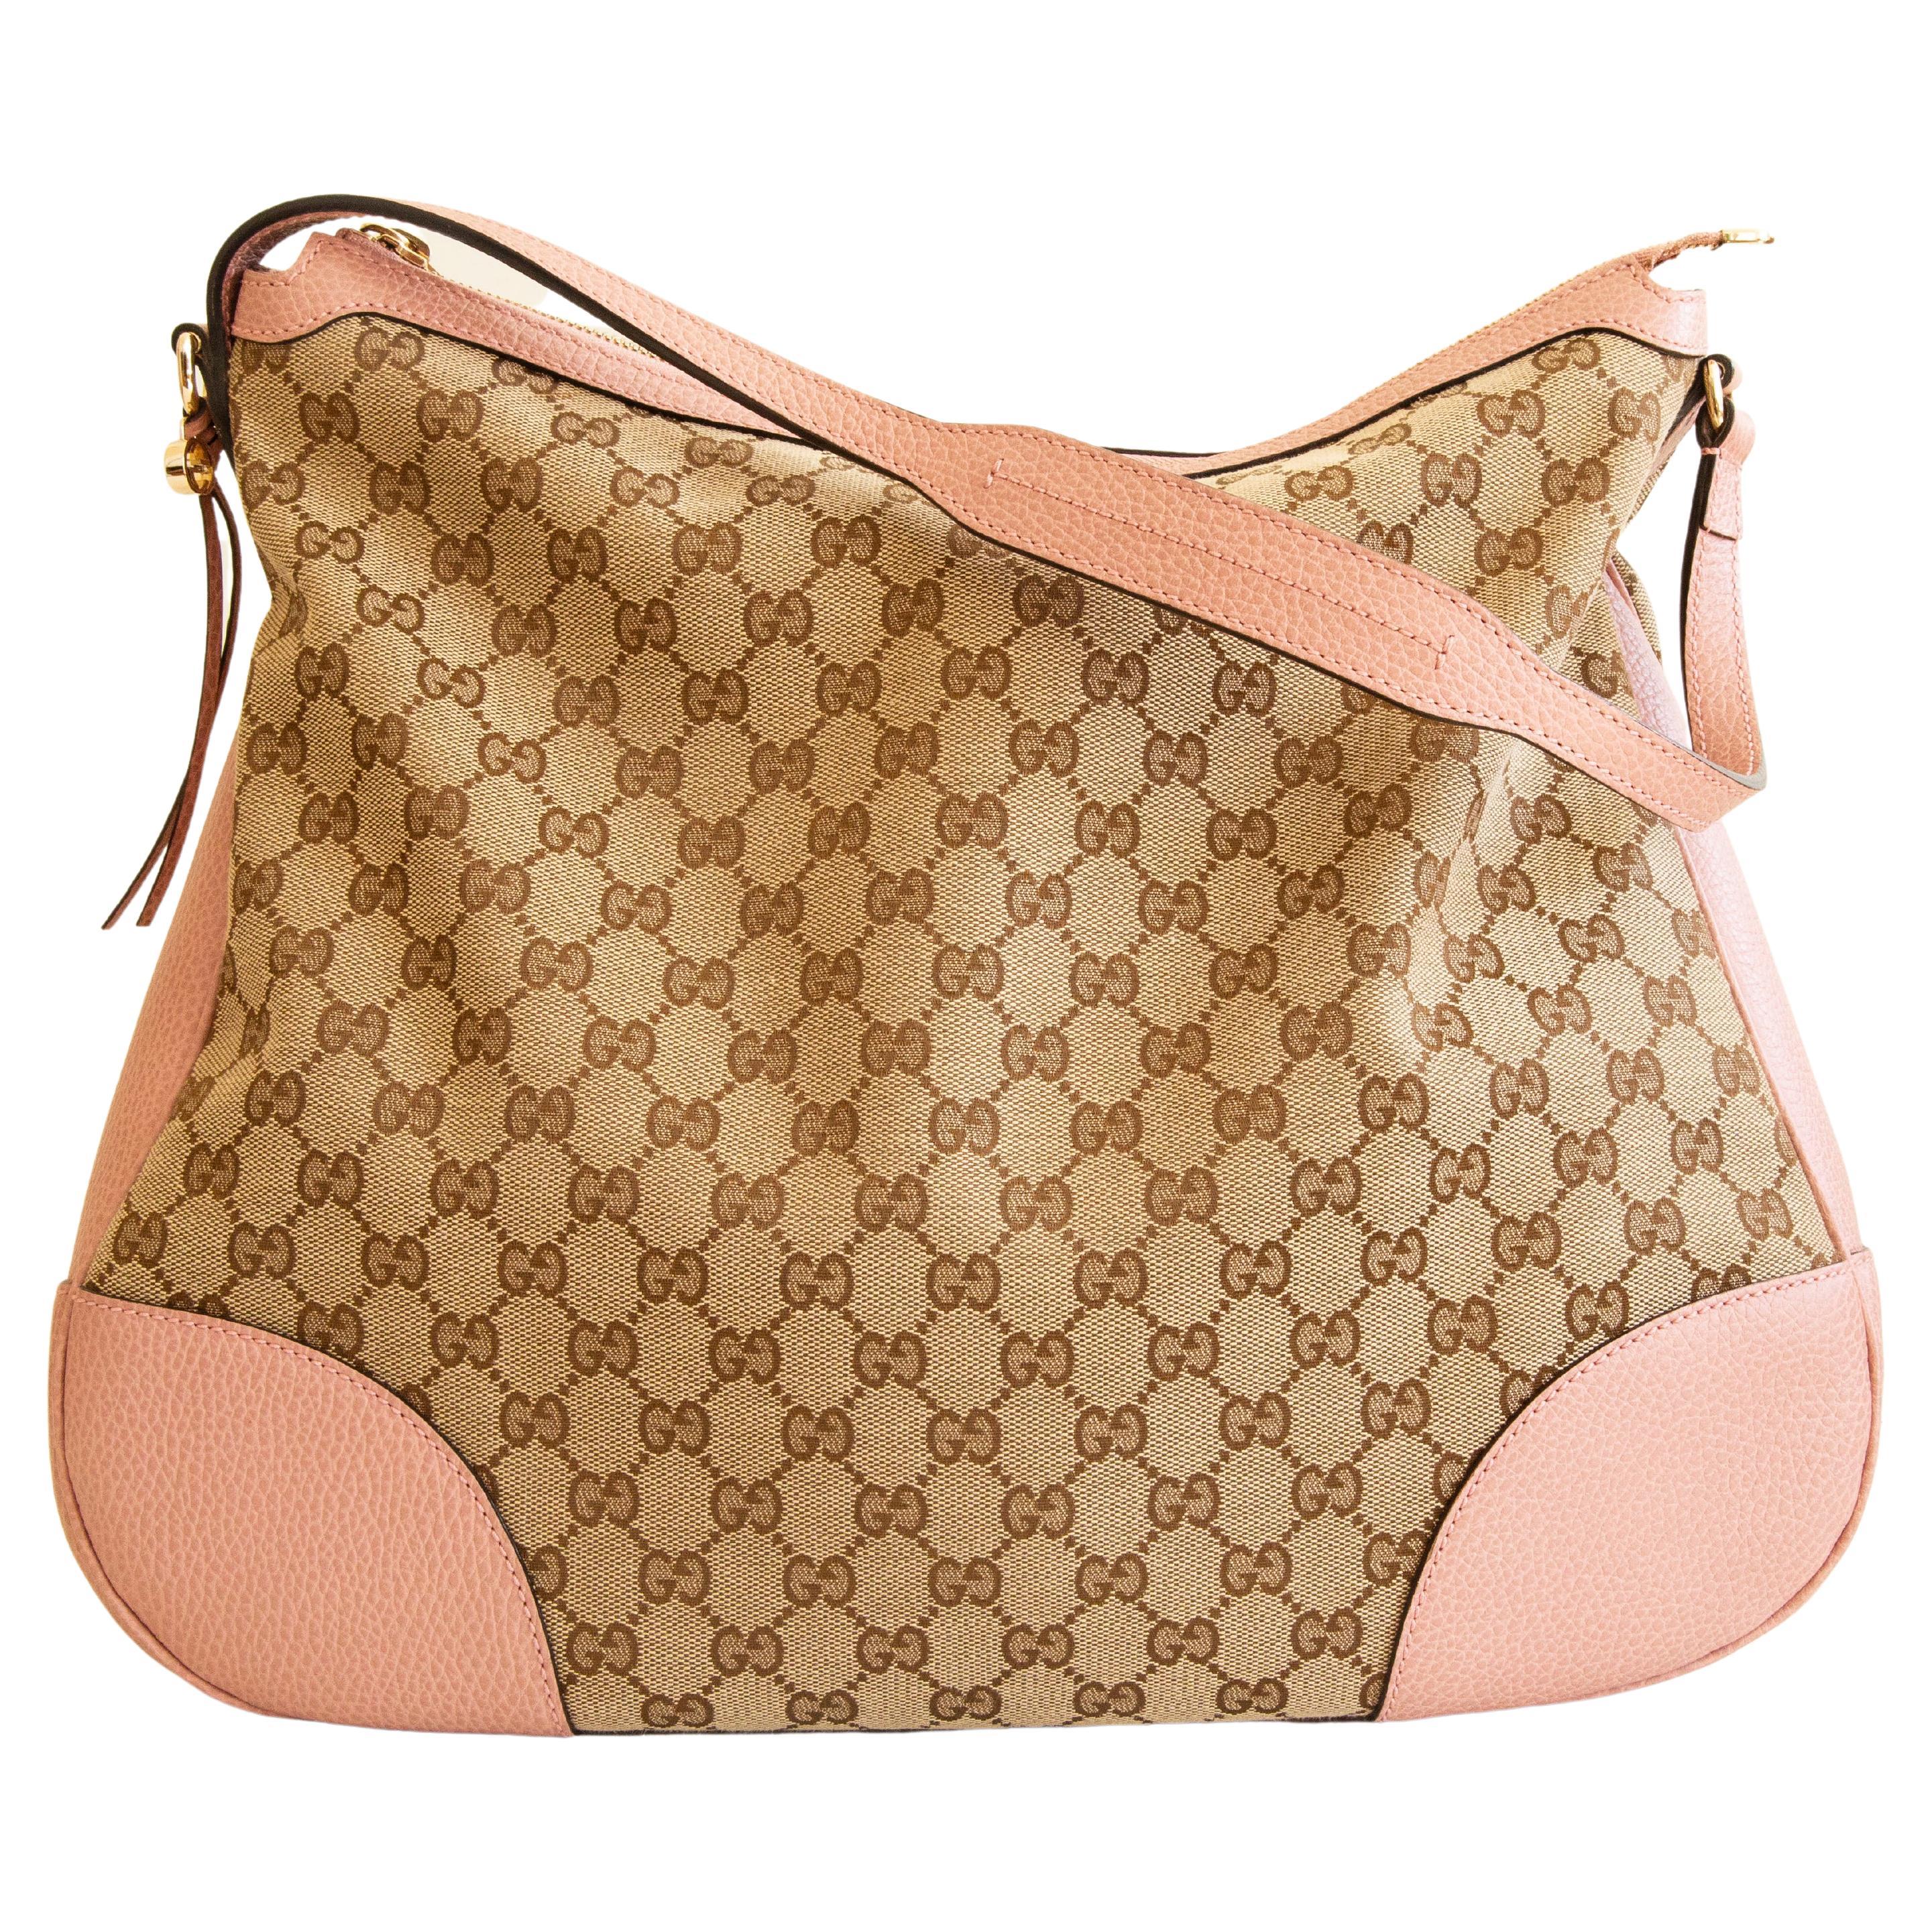 Gucci Large Bree Hobo Bag in GG Canvas with Pink Leather Trim For Sale